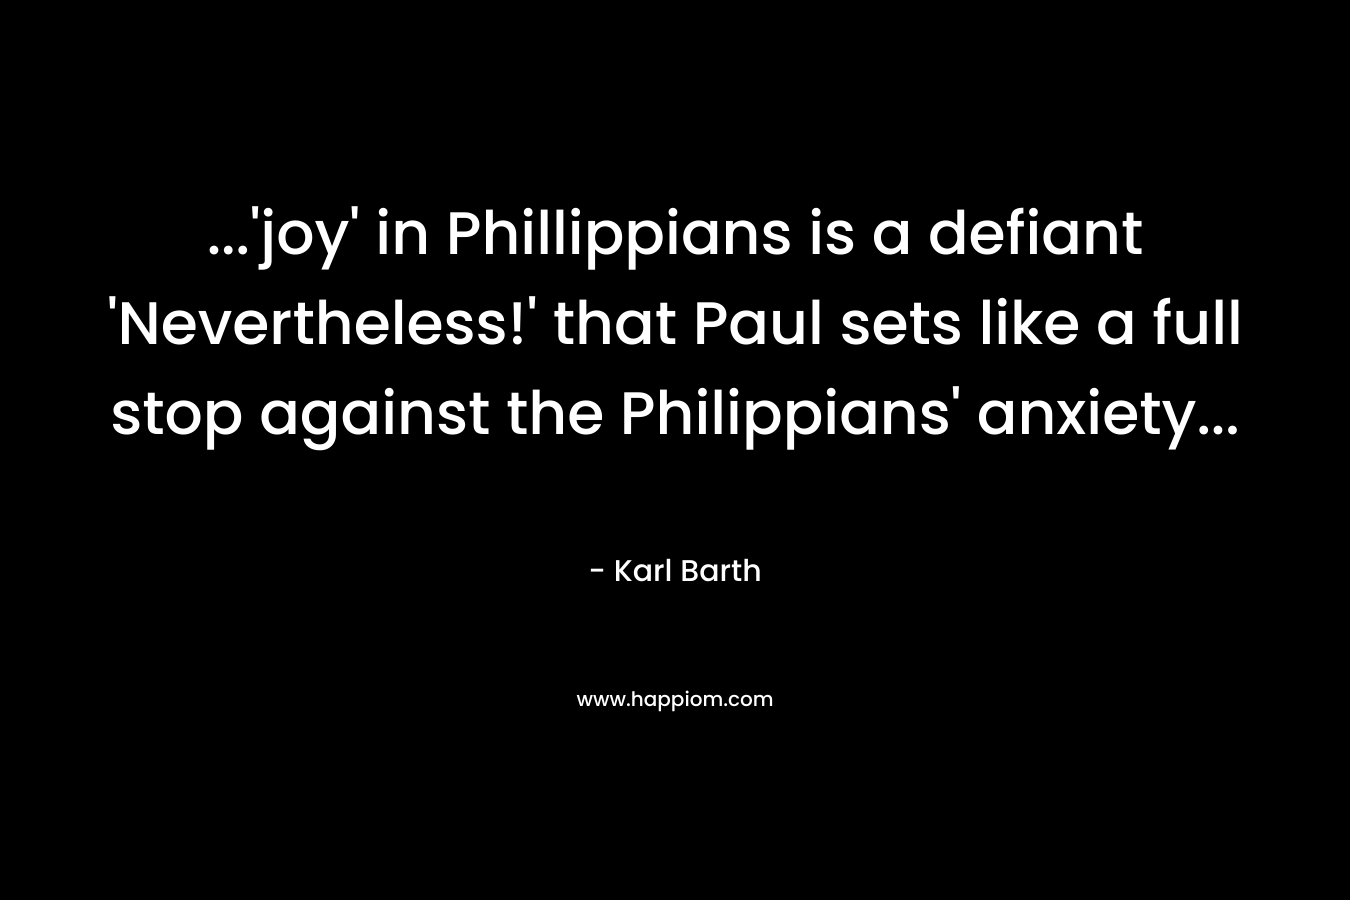 ...'joy' in Phillippians is a defiant 'Nevertheless!' that Paul sets like a full stop against the Philippians' anxiety...